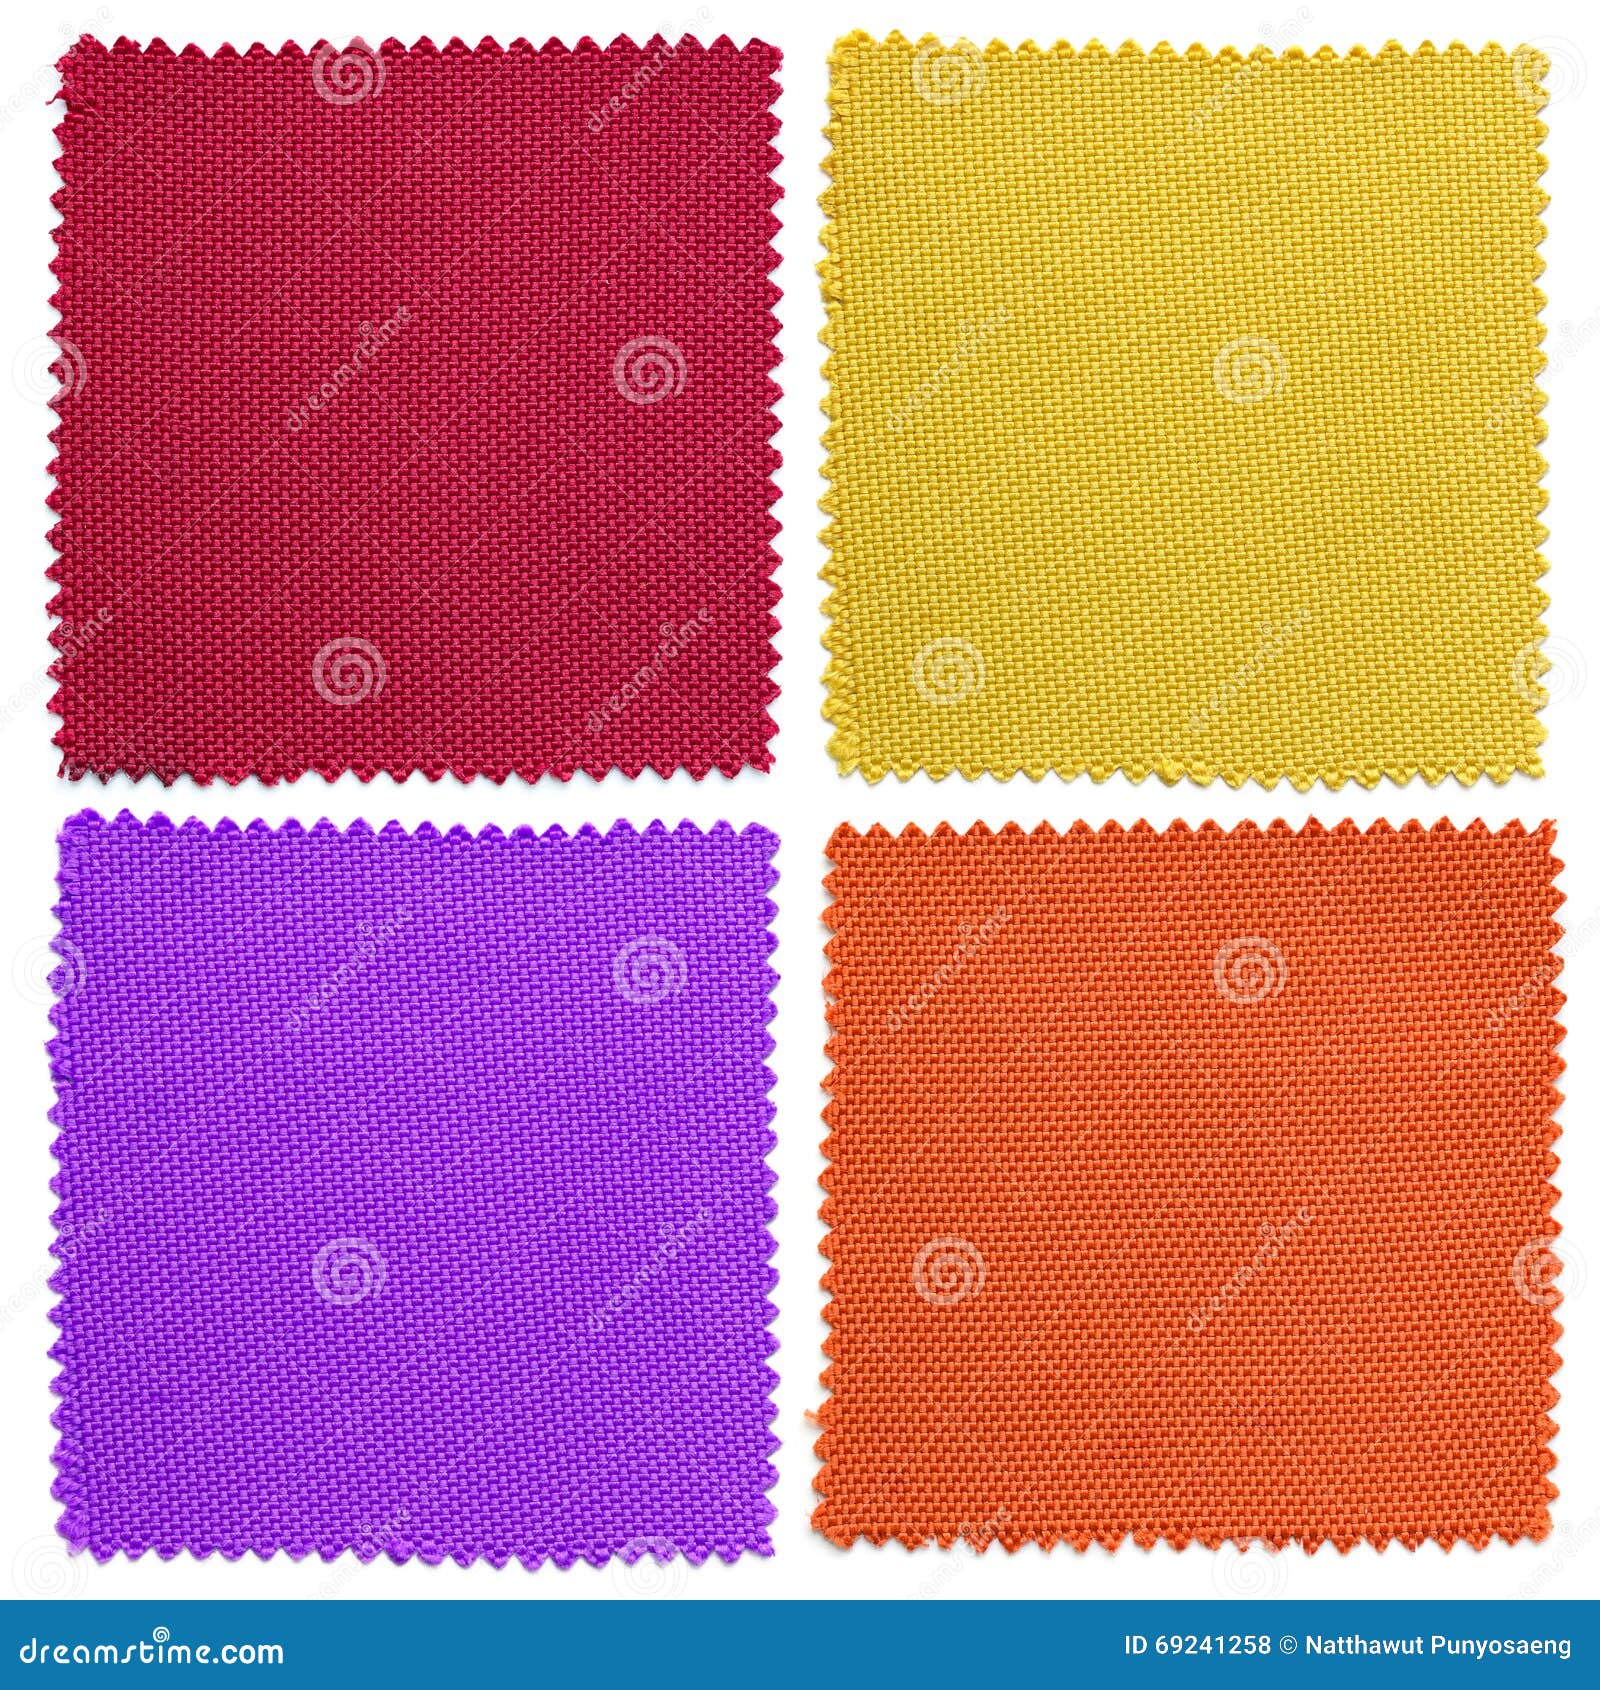 Set Of Fabric Swatch Samples Texture Stock Photo - Image of empty ...